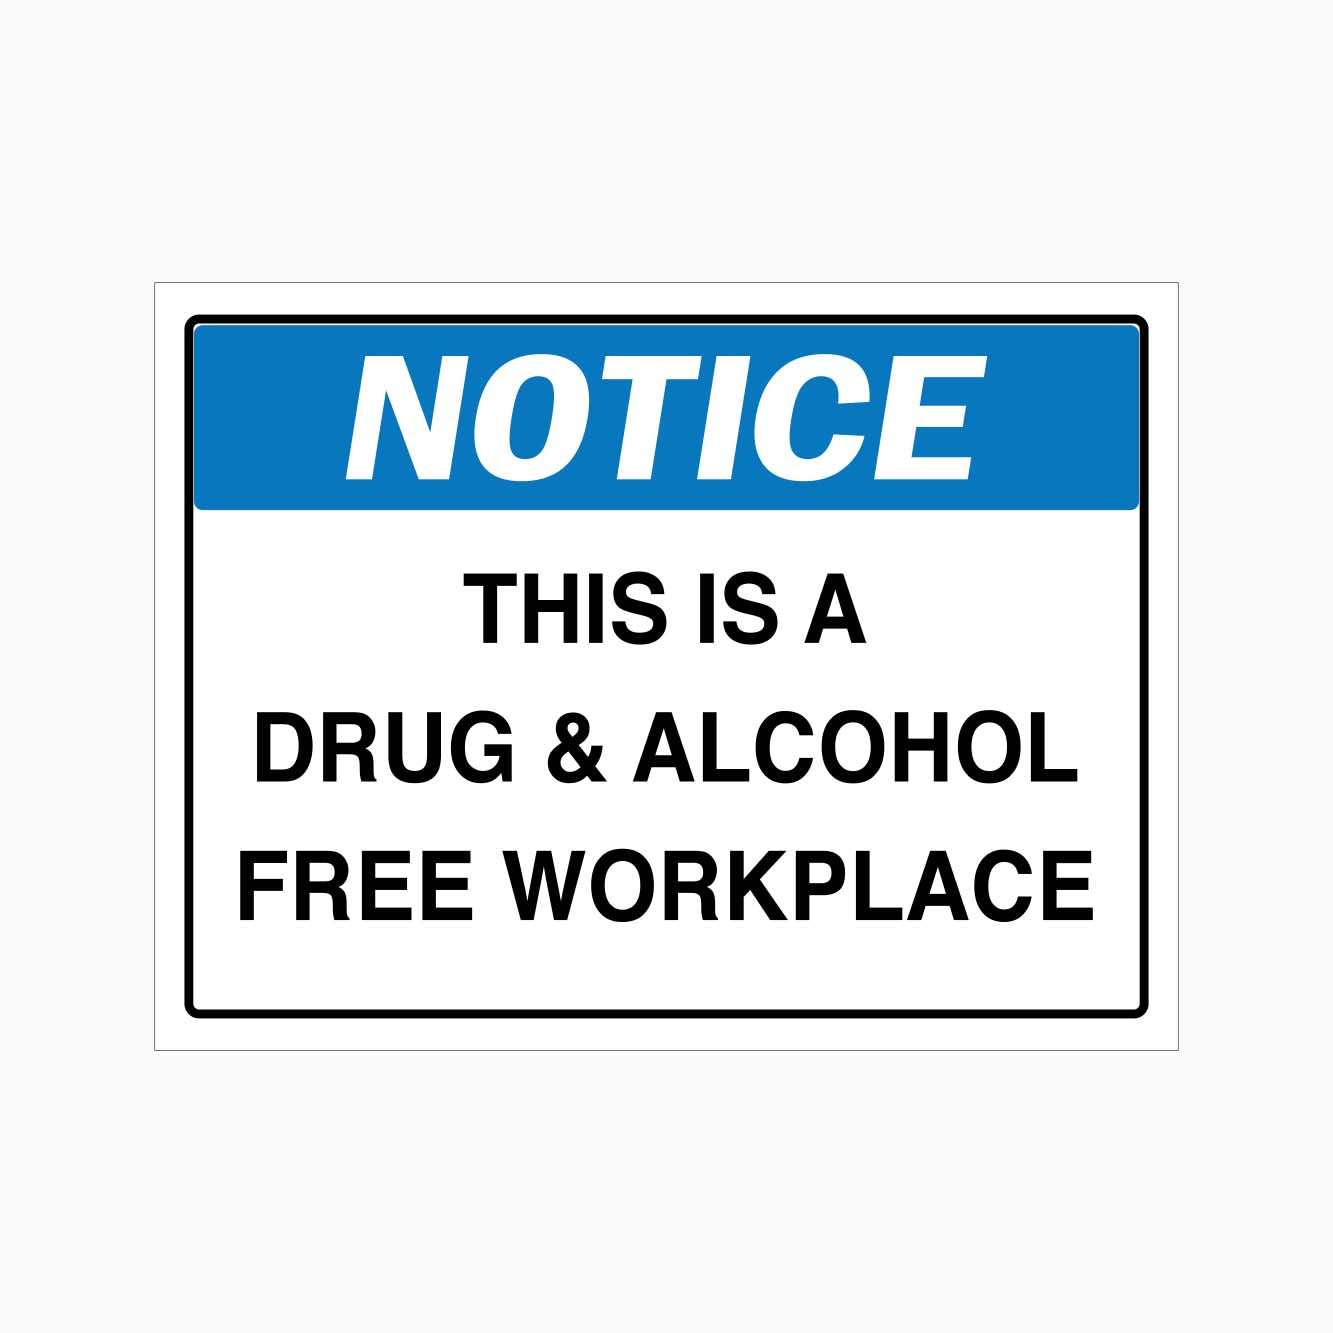 NOTICE THIS IS A DRUG AND ALCOHOL FREE WORKPLACE SIGN